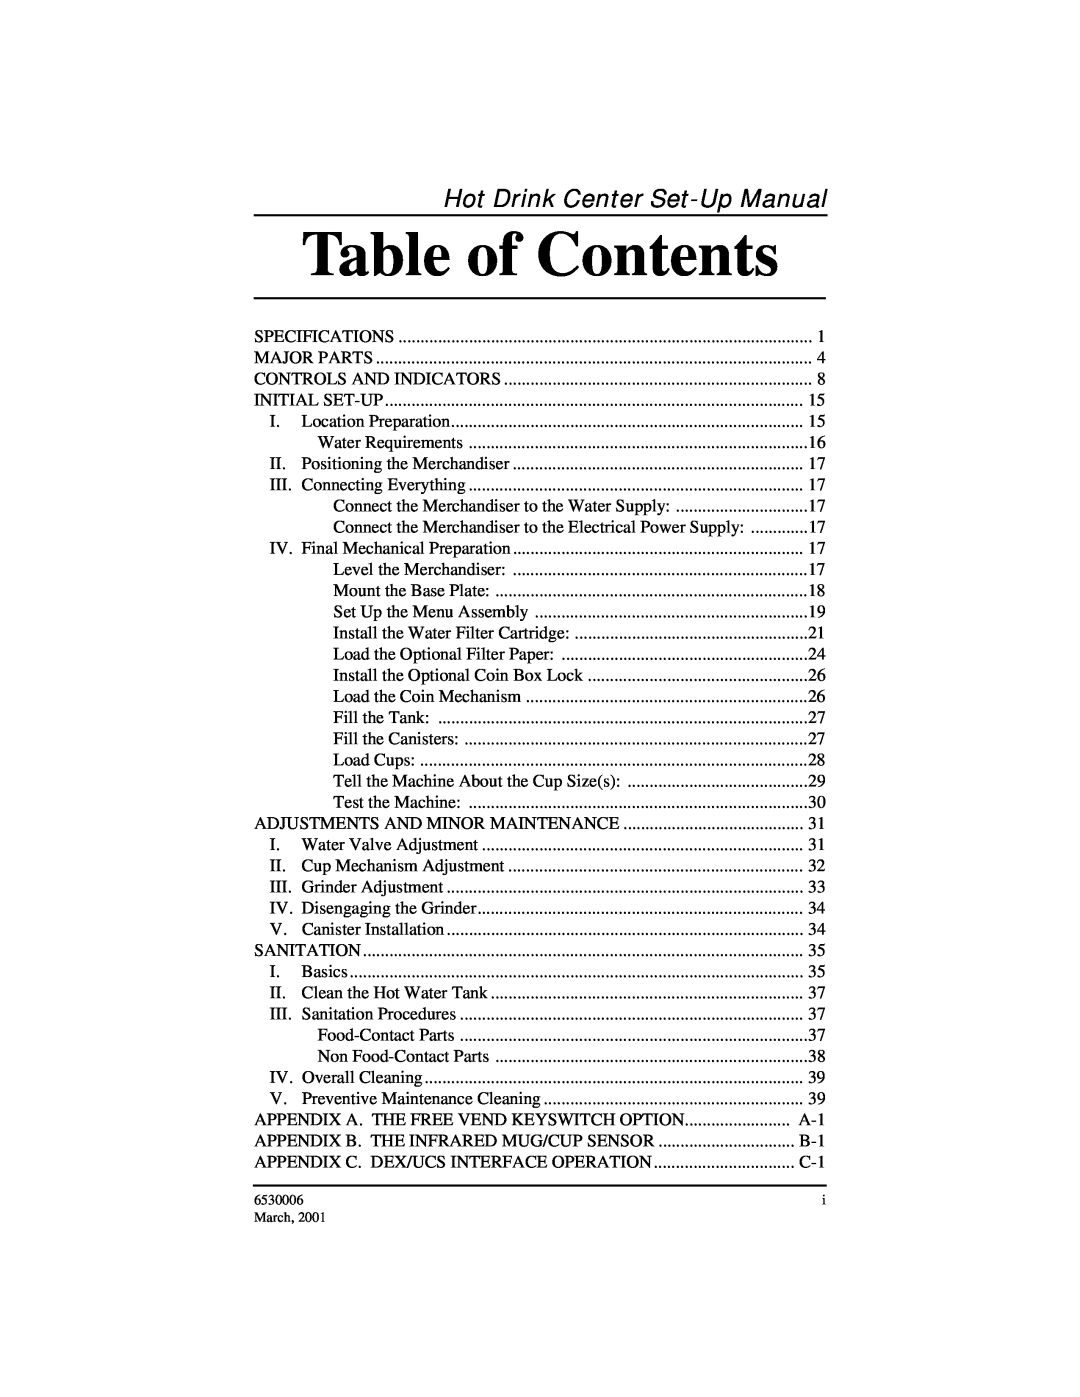 Crane Merchandising Systems 6530006 manual Hot Drink Center Set-Up Manual, Table of Contents 